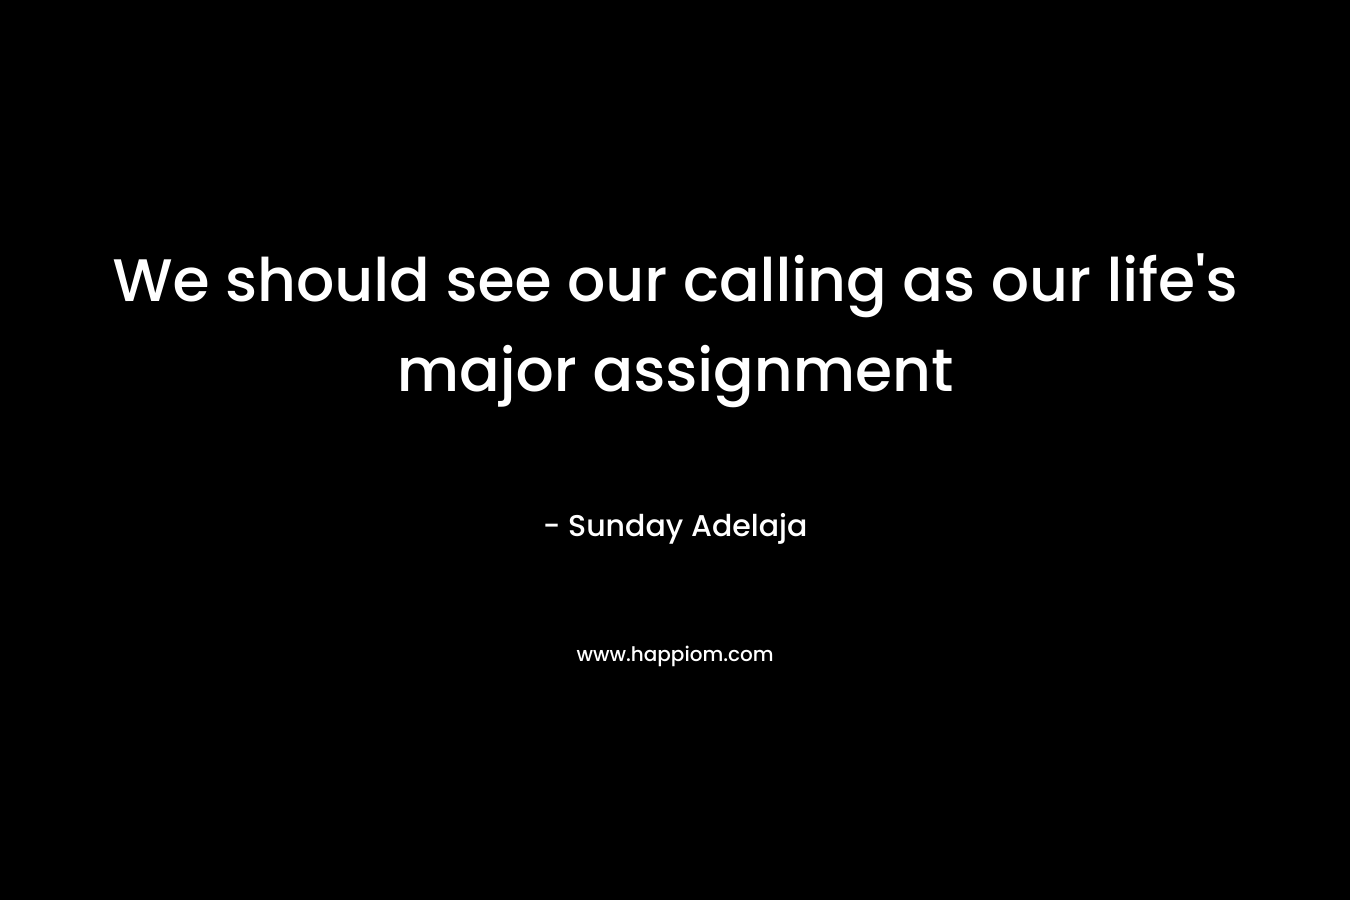 We should see our calling as our life's major assignment